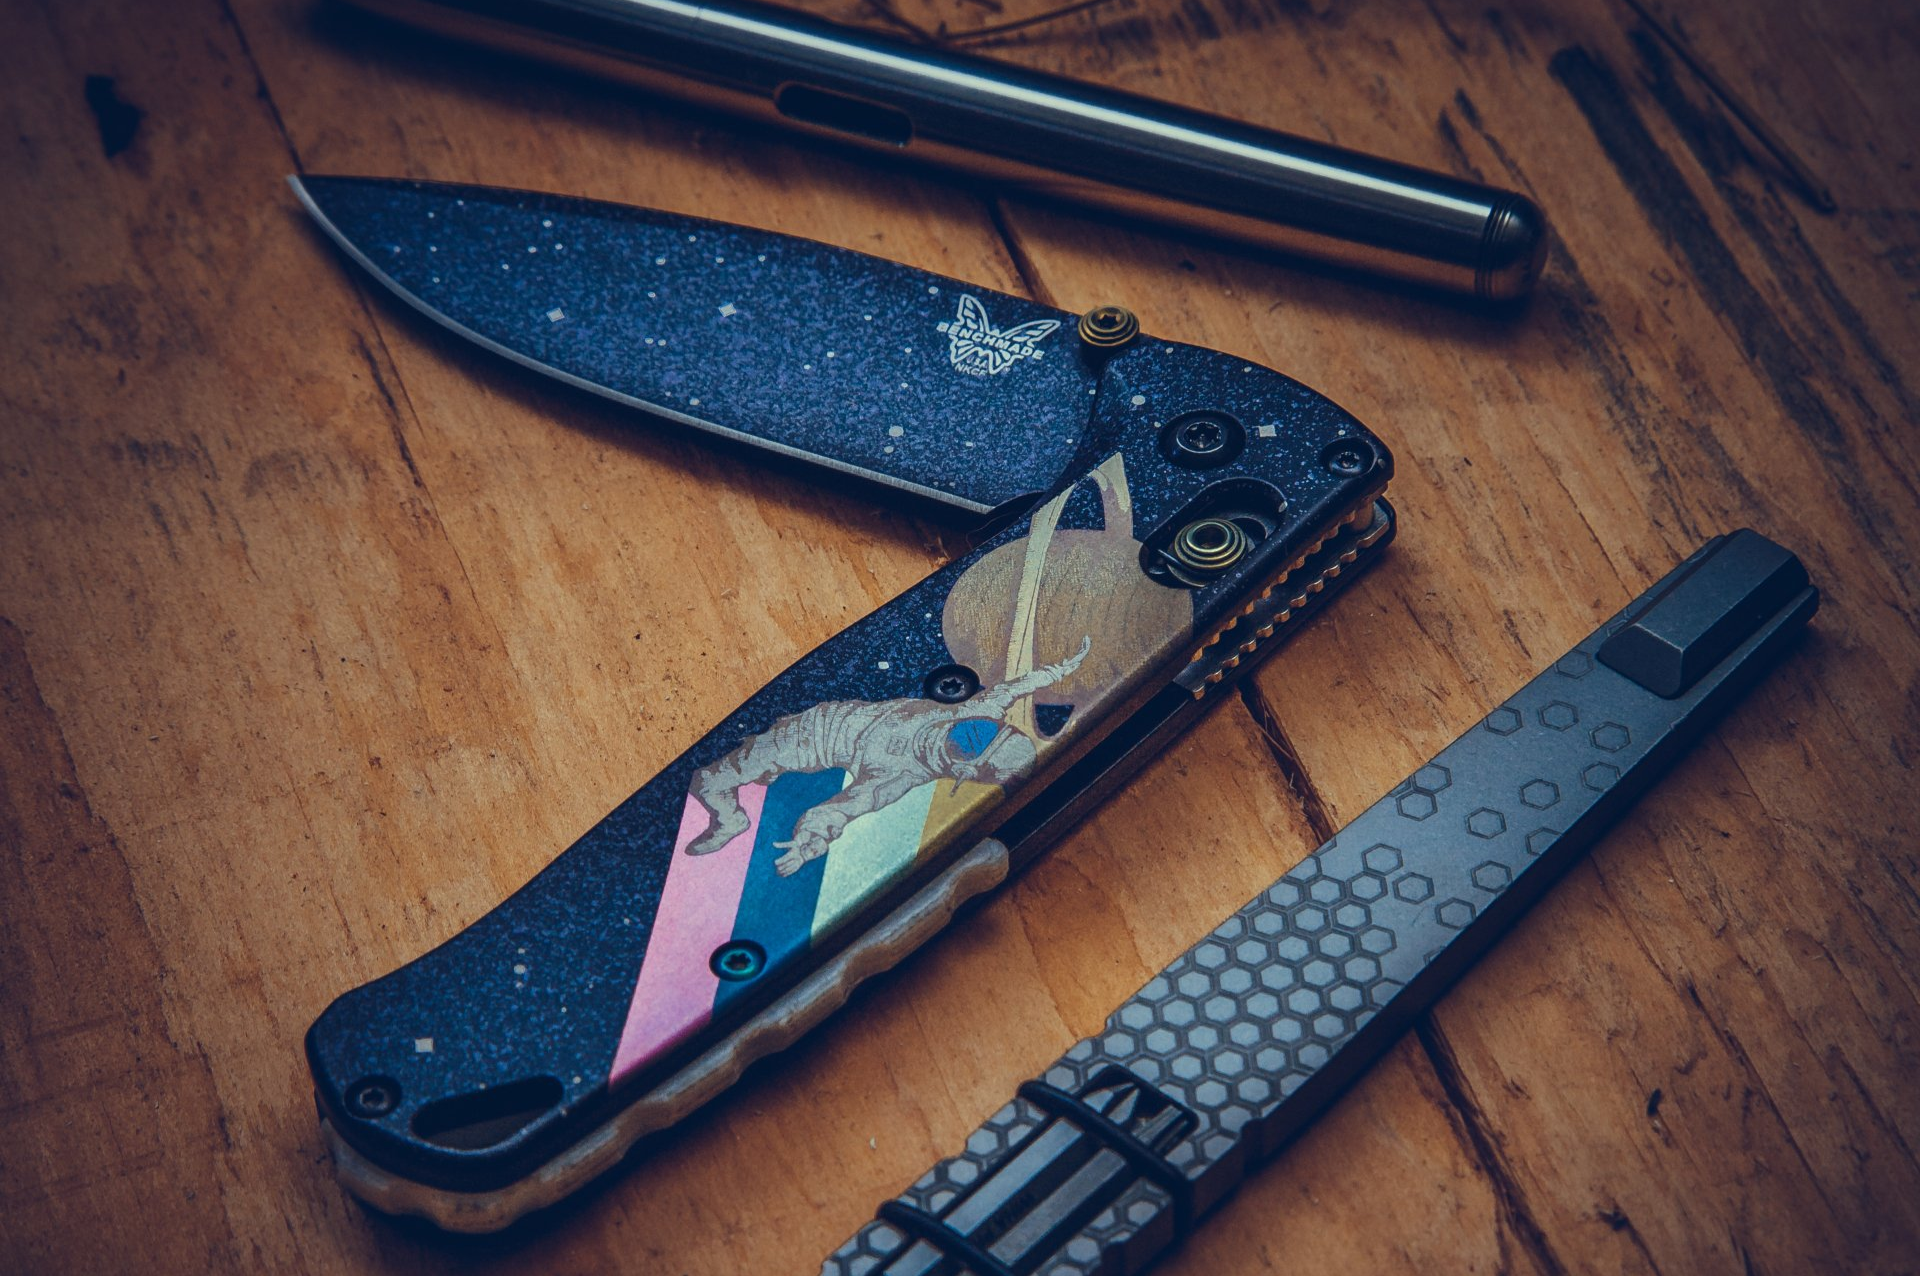 Northern Knives x Colorful Filth Benchmade Bugout Alongside the Machine Era Fountain Pen and the Vero Engineering Fulcrum